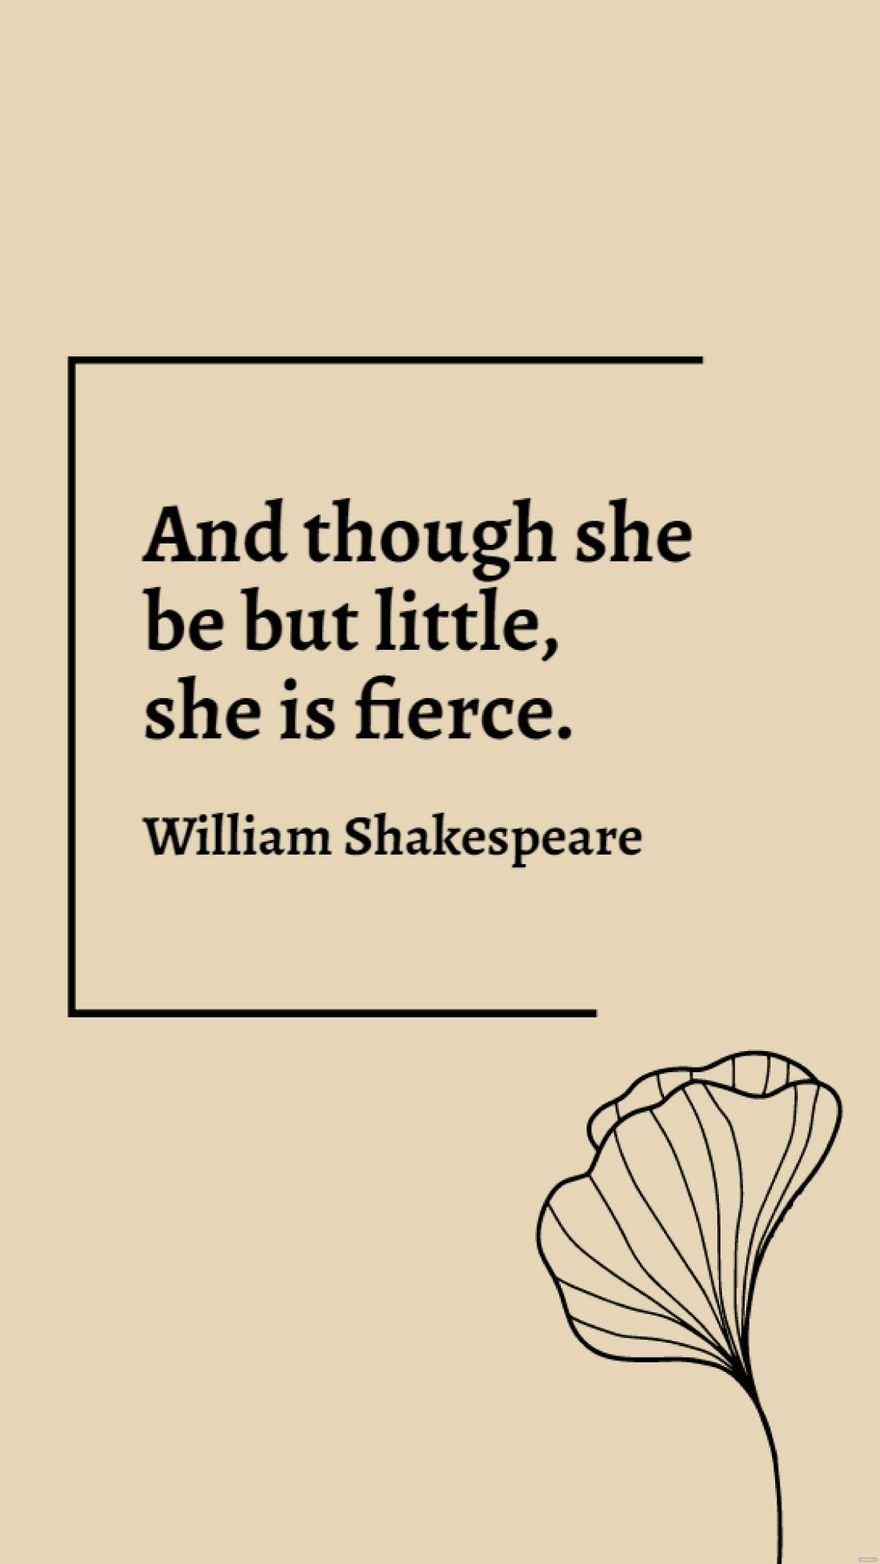 William Shakespeare - And though she be but little, she is fierce.